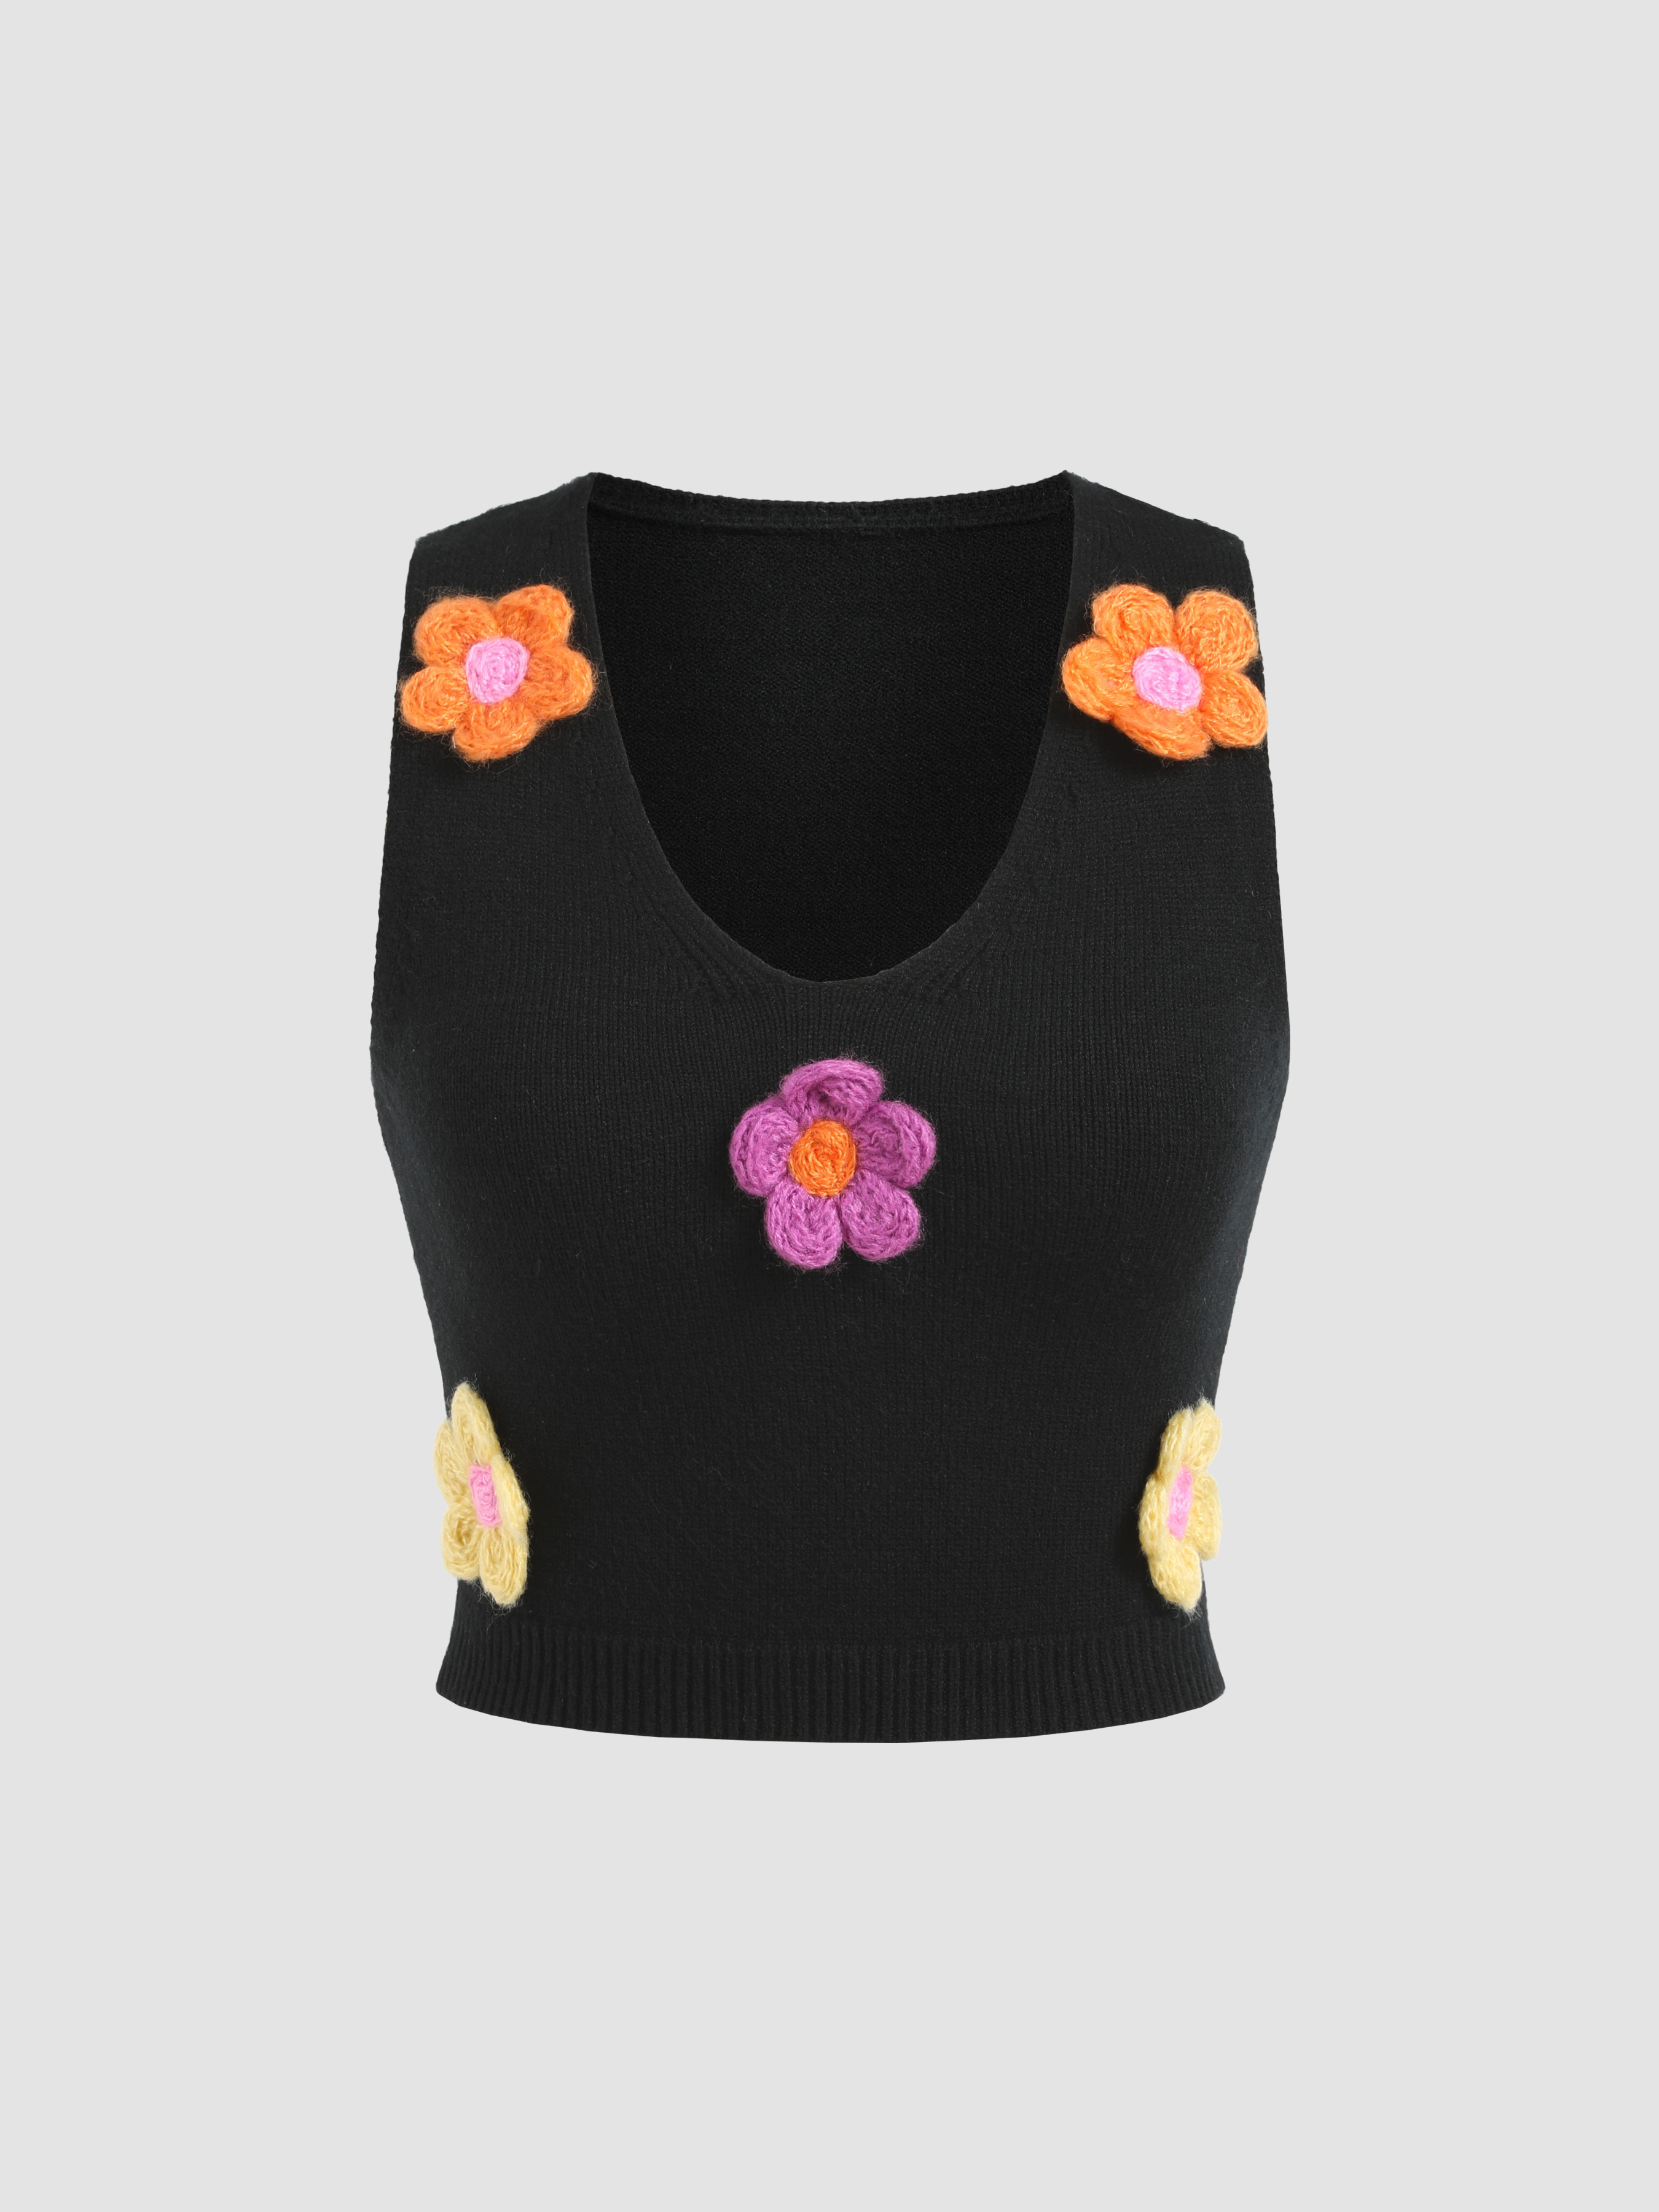 Flower V-neck Knit Crop Top For Daily Casual Picnic